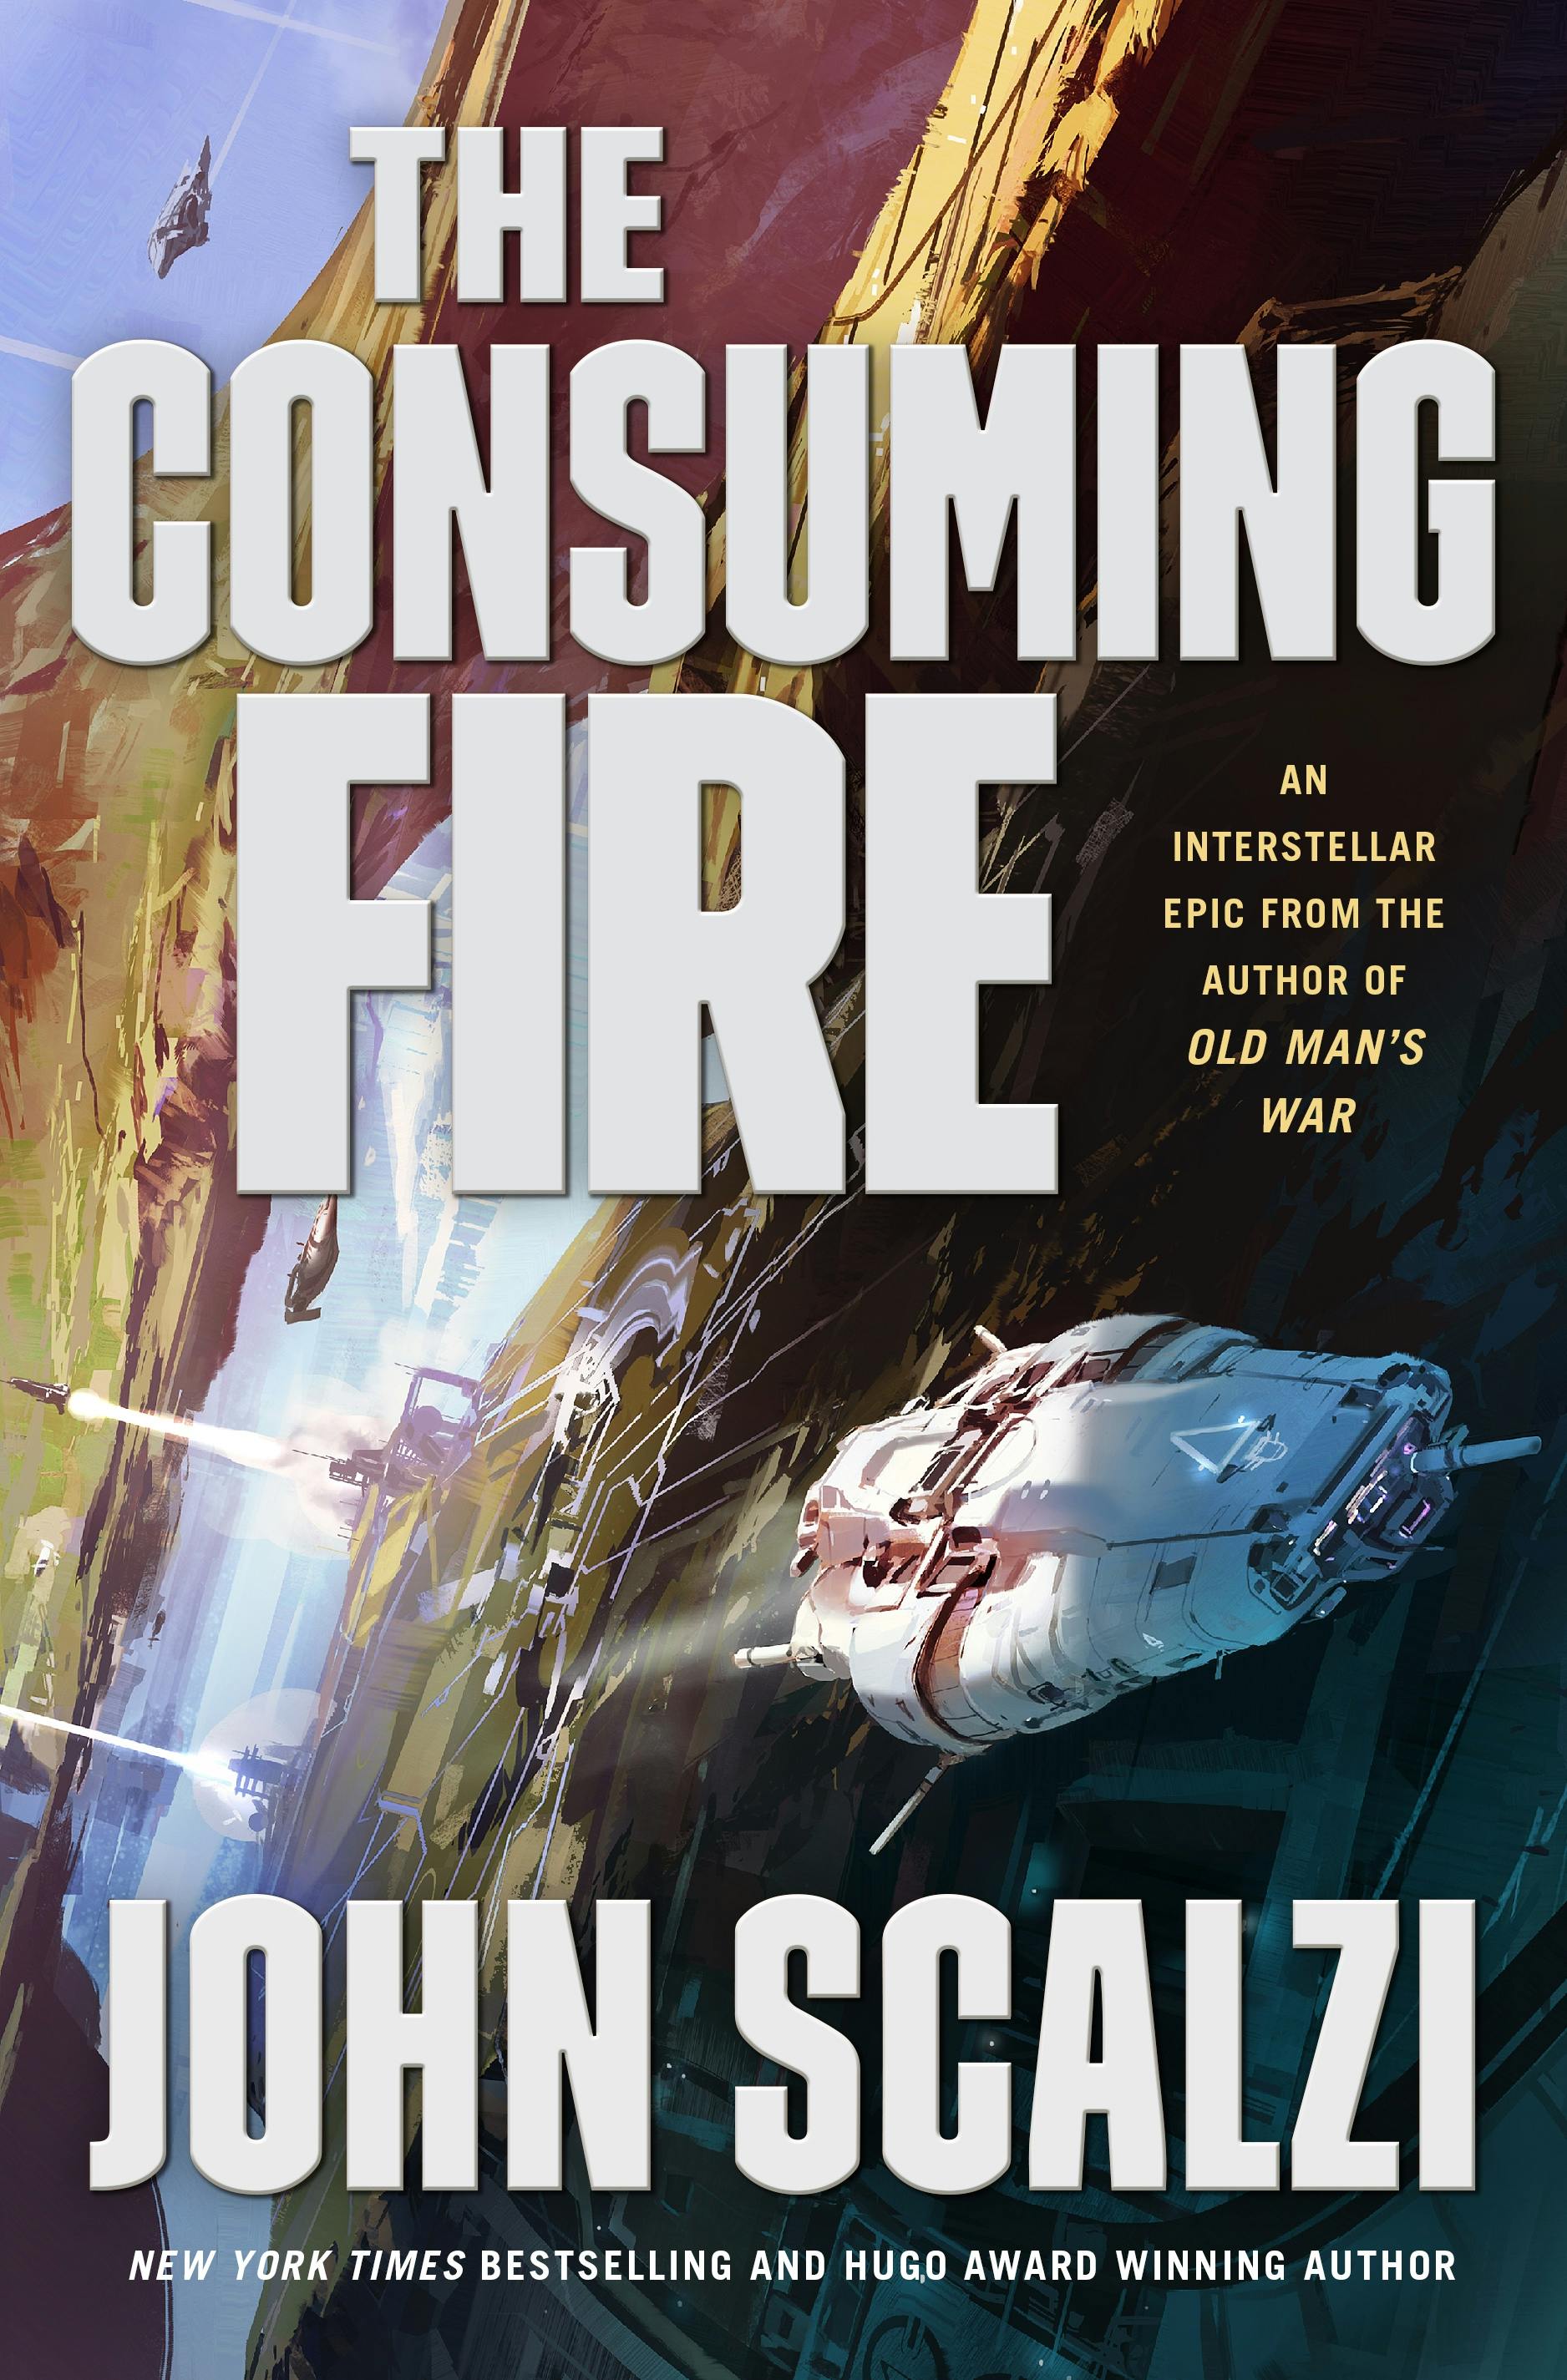 Cover for the book titled as: The Consuming Fire